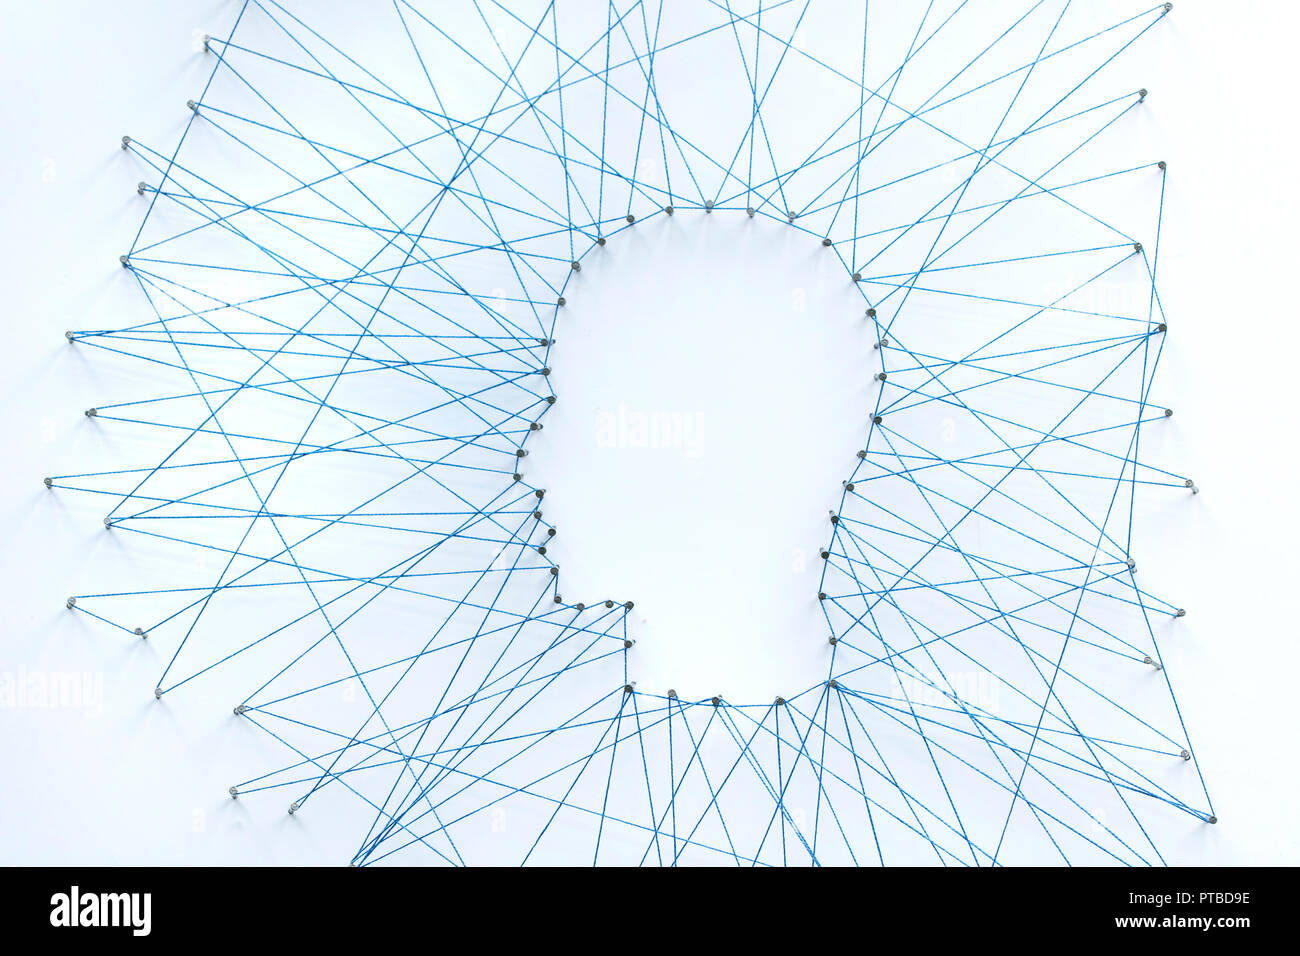 Human head shape made from a large grid of pins connected with string. Communication technology and mental health concept Stock Photo